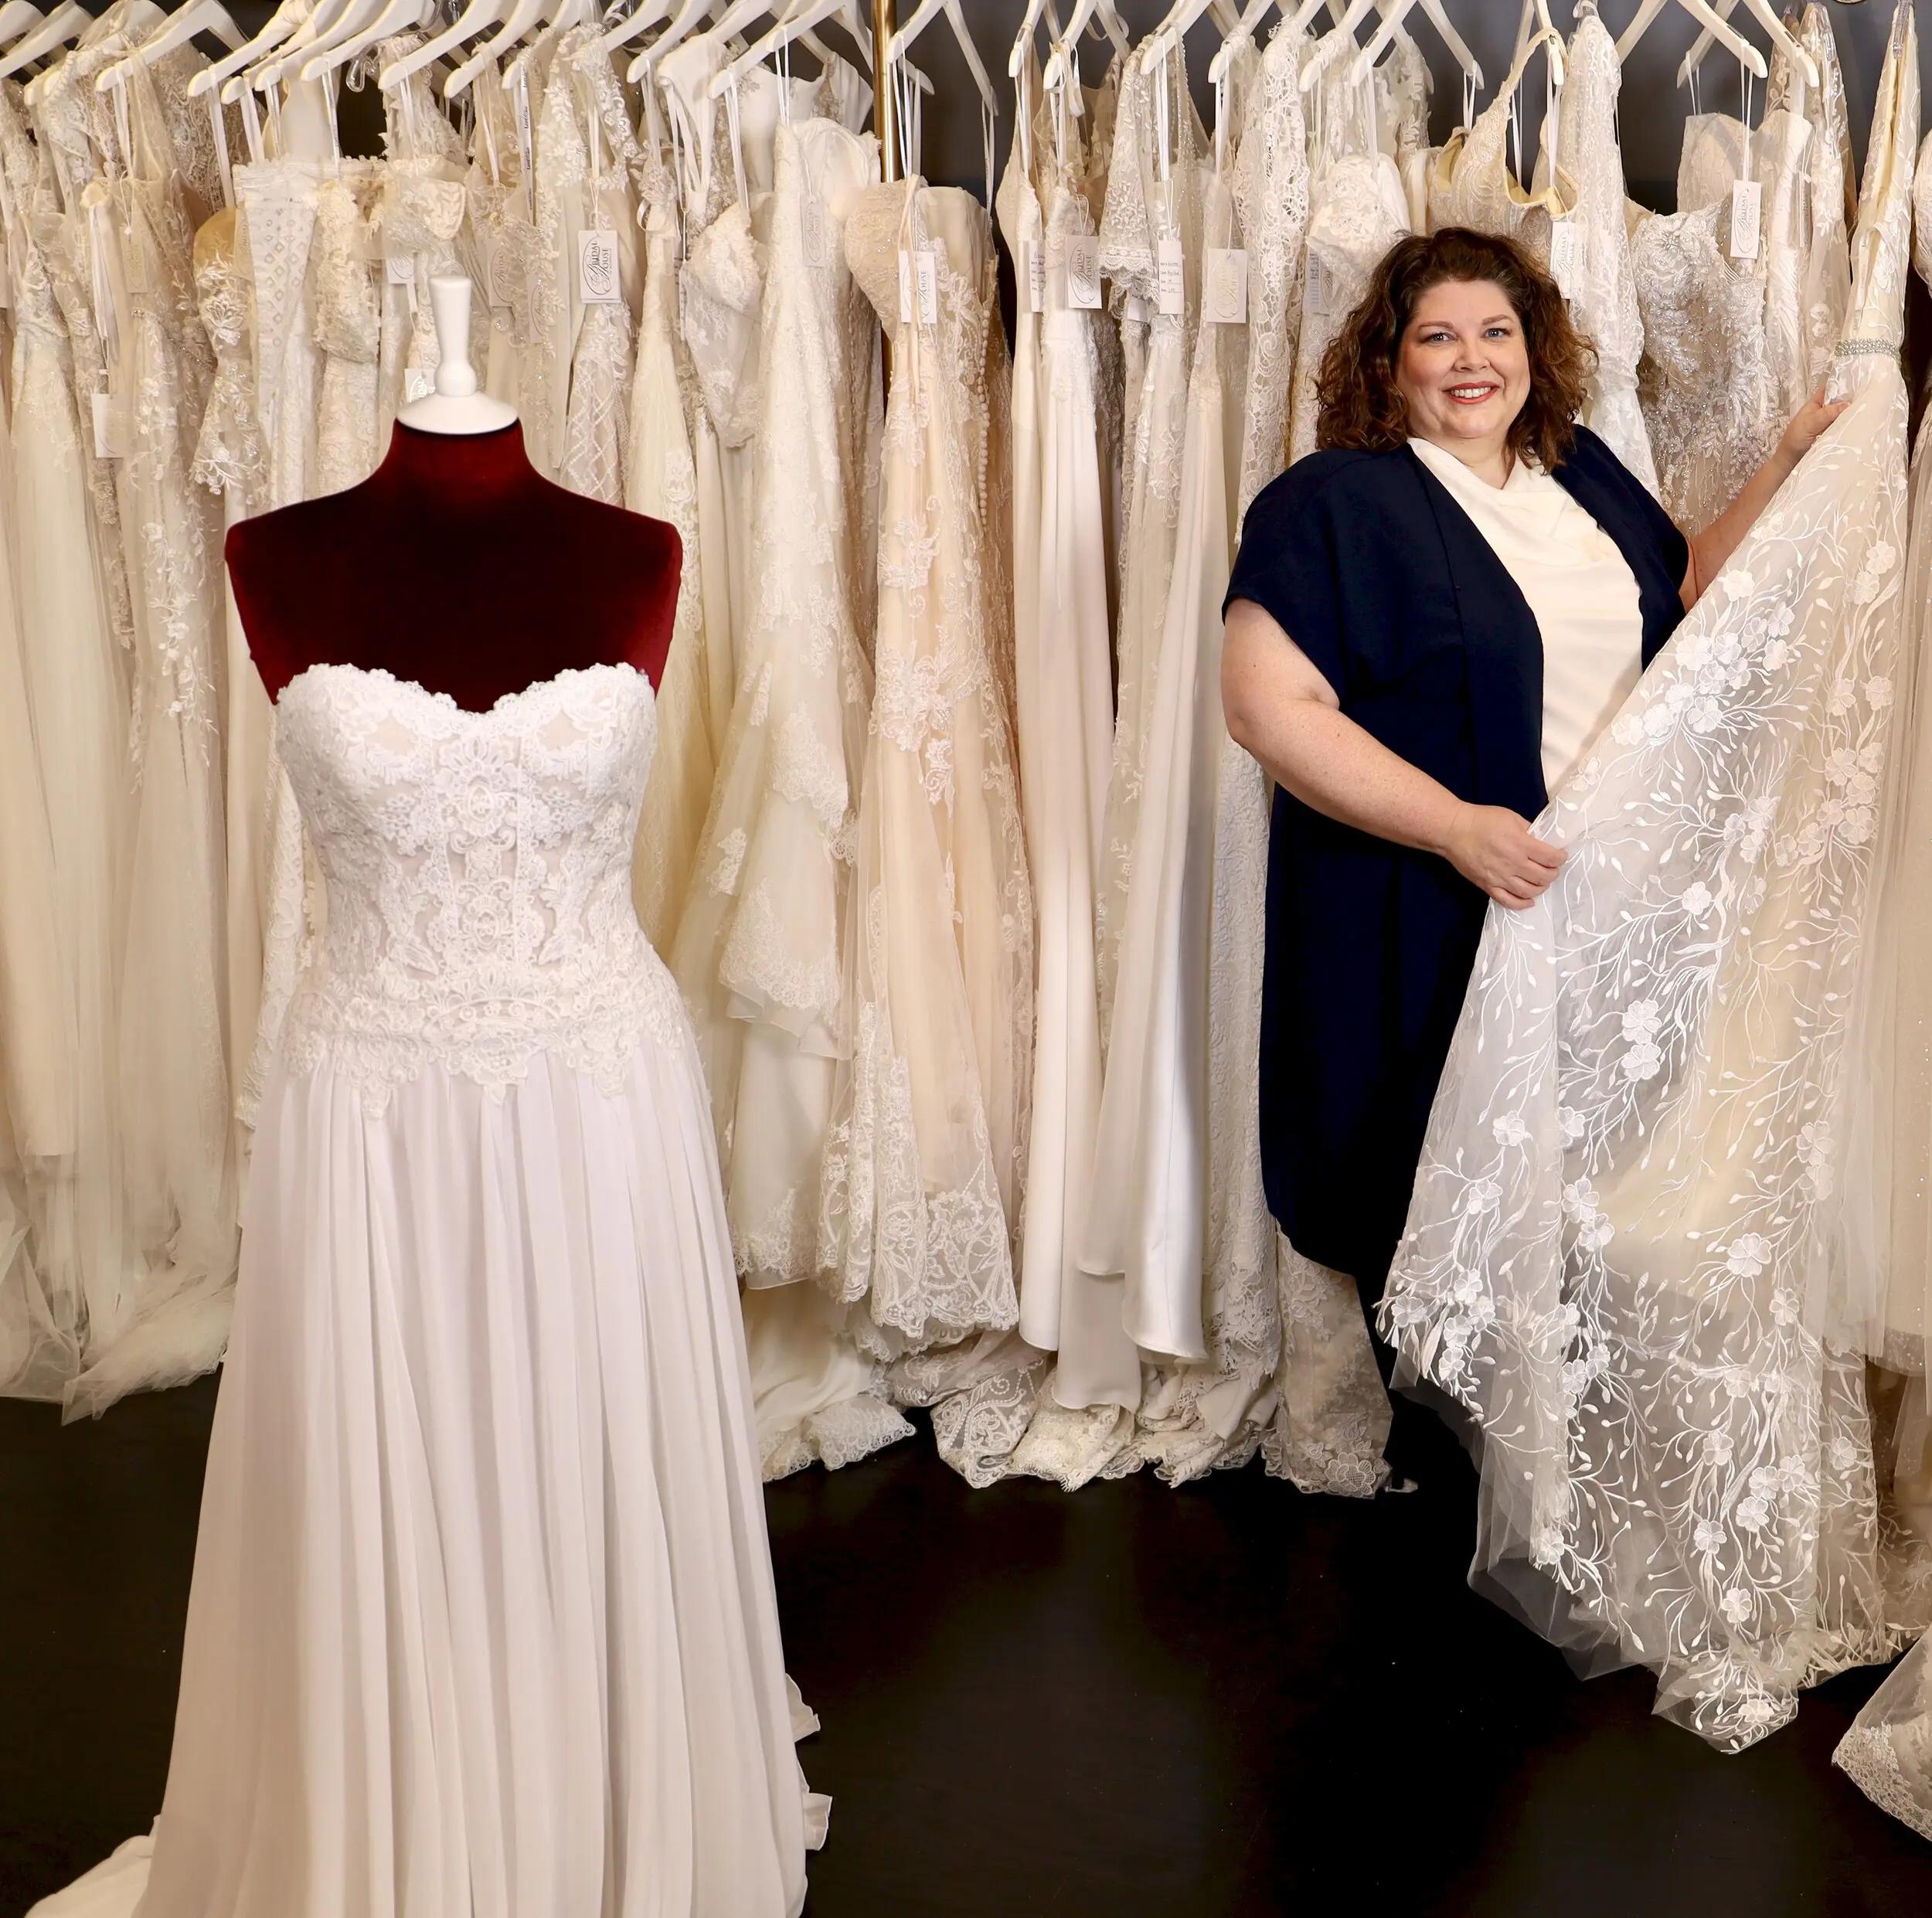 5 Pro Tips for Navigating Buying a Wedding Gown Image